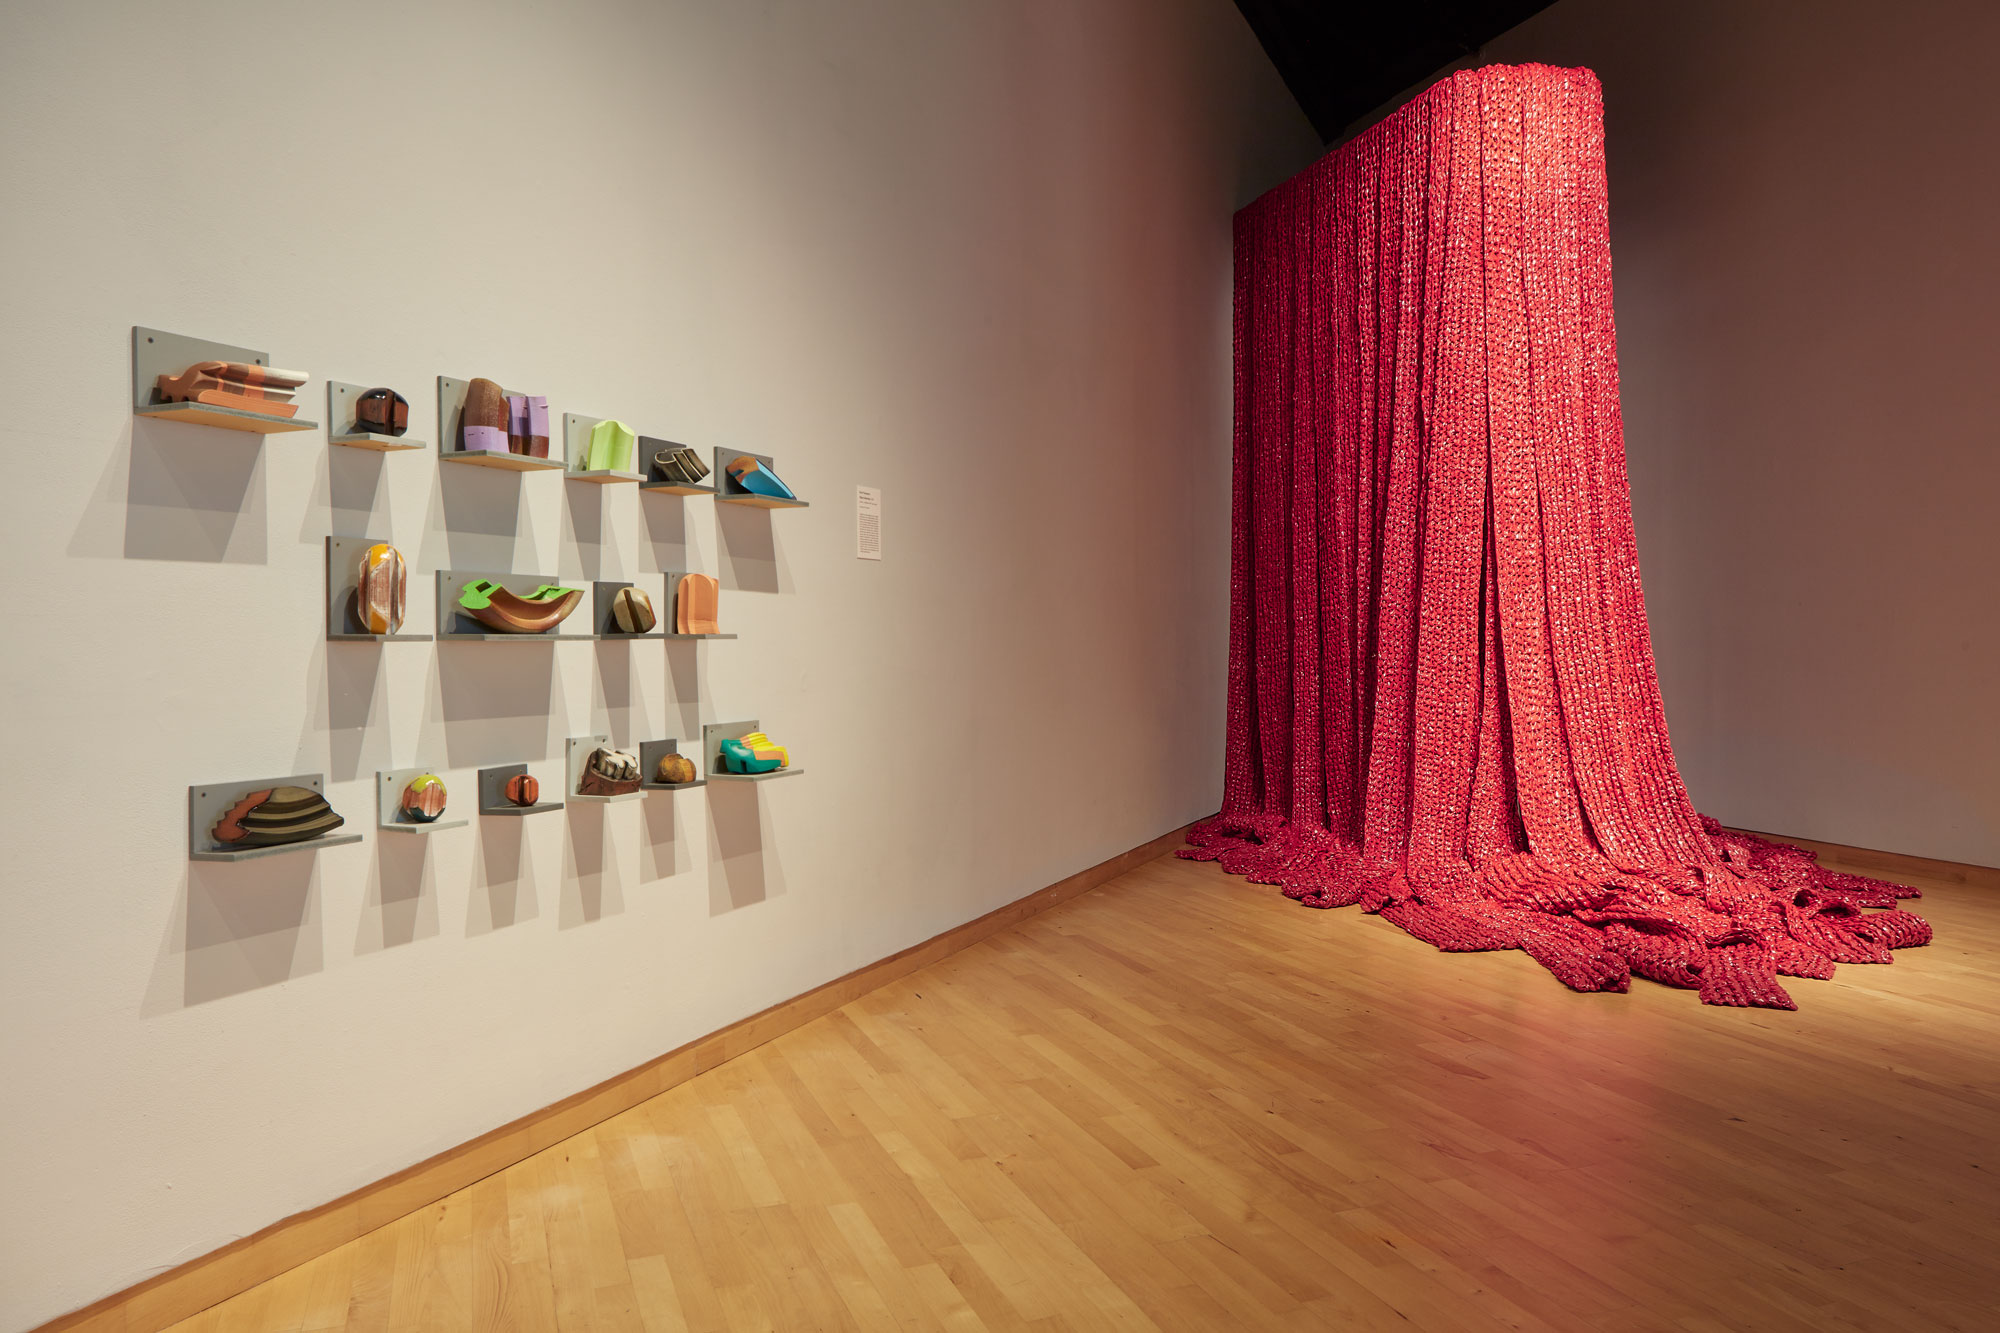 Installation view of Skyway 20/21 exhibition at USF Contemporary Art Museum. Left to right: works by Kodi Thompson and Akiko Kotani. Photo: Will Lytch.